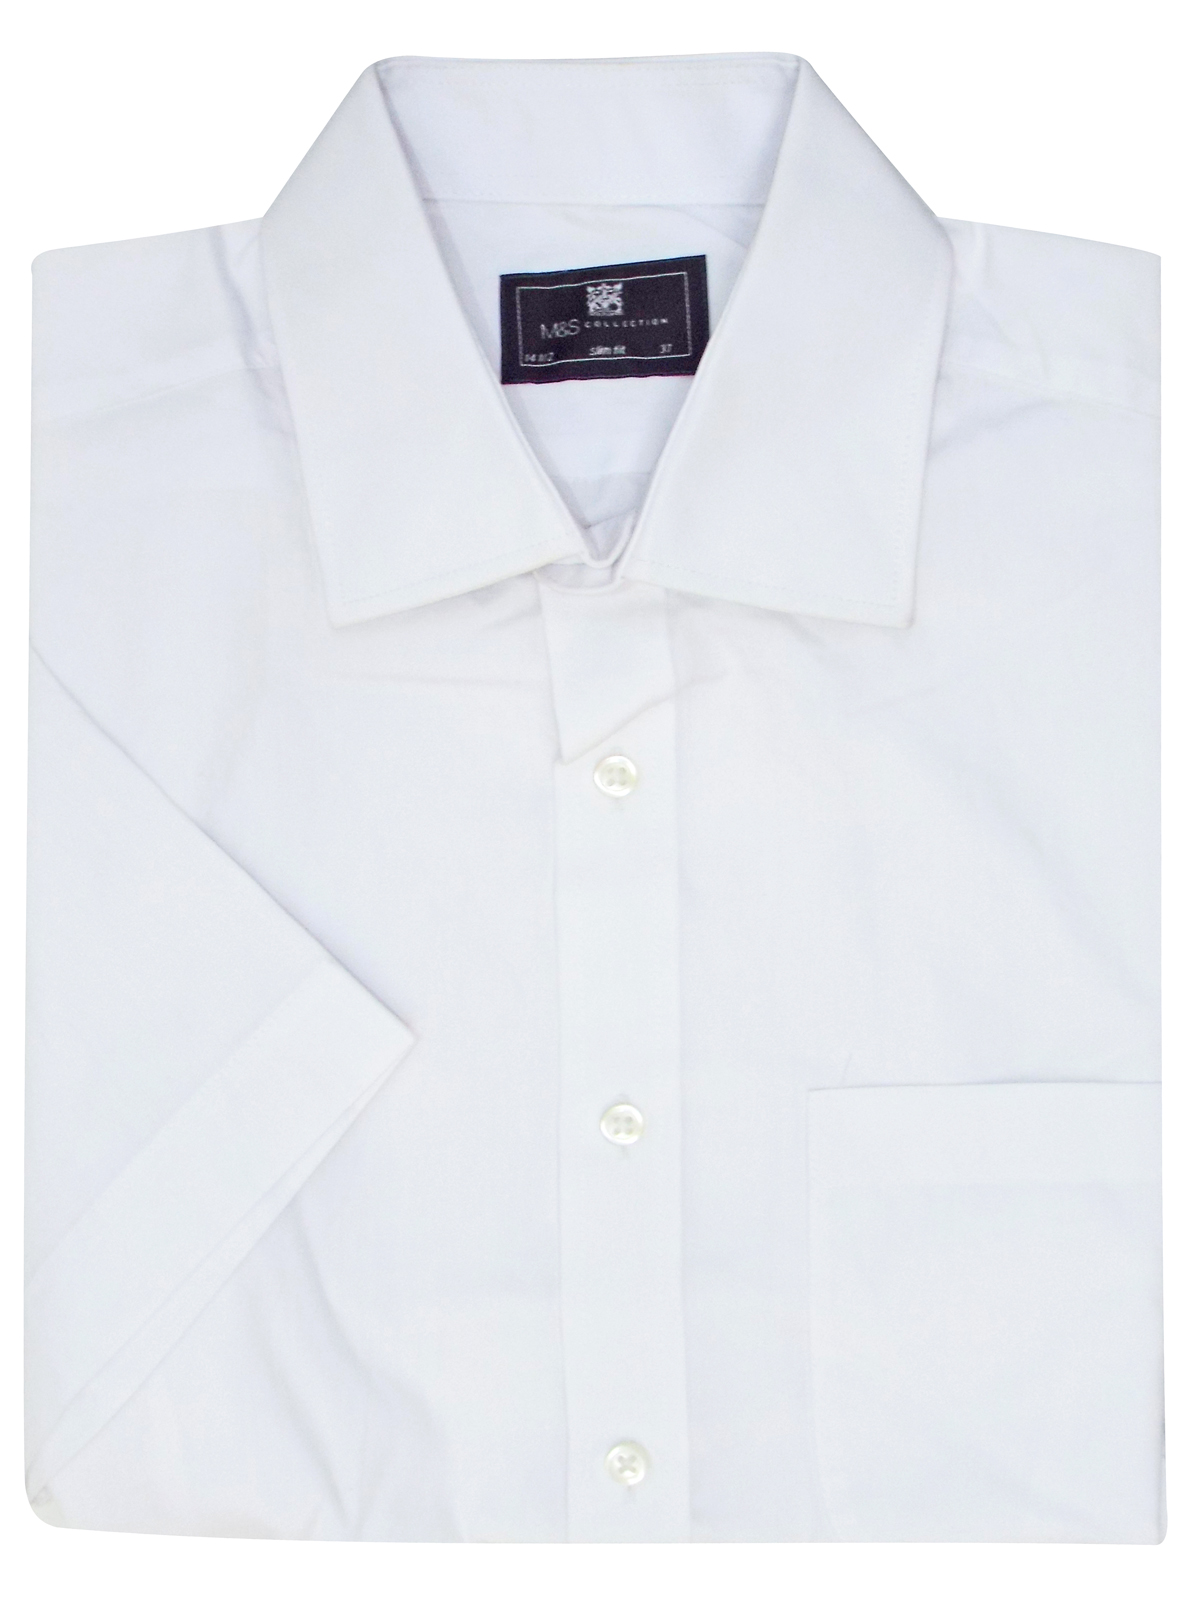 Marks and Spencer - - M&5 WHITE Pure Cotton Short Sleeve Slim Fit Shirt ...